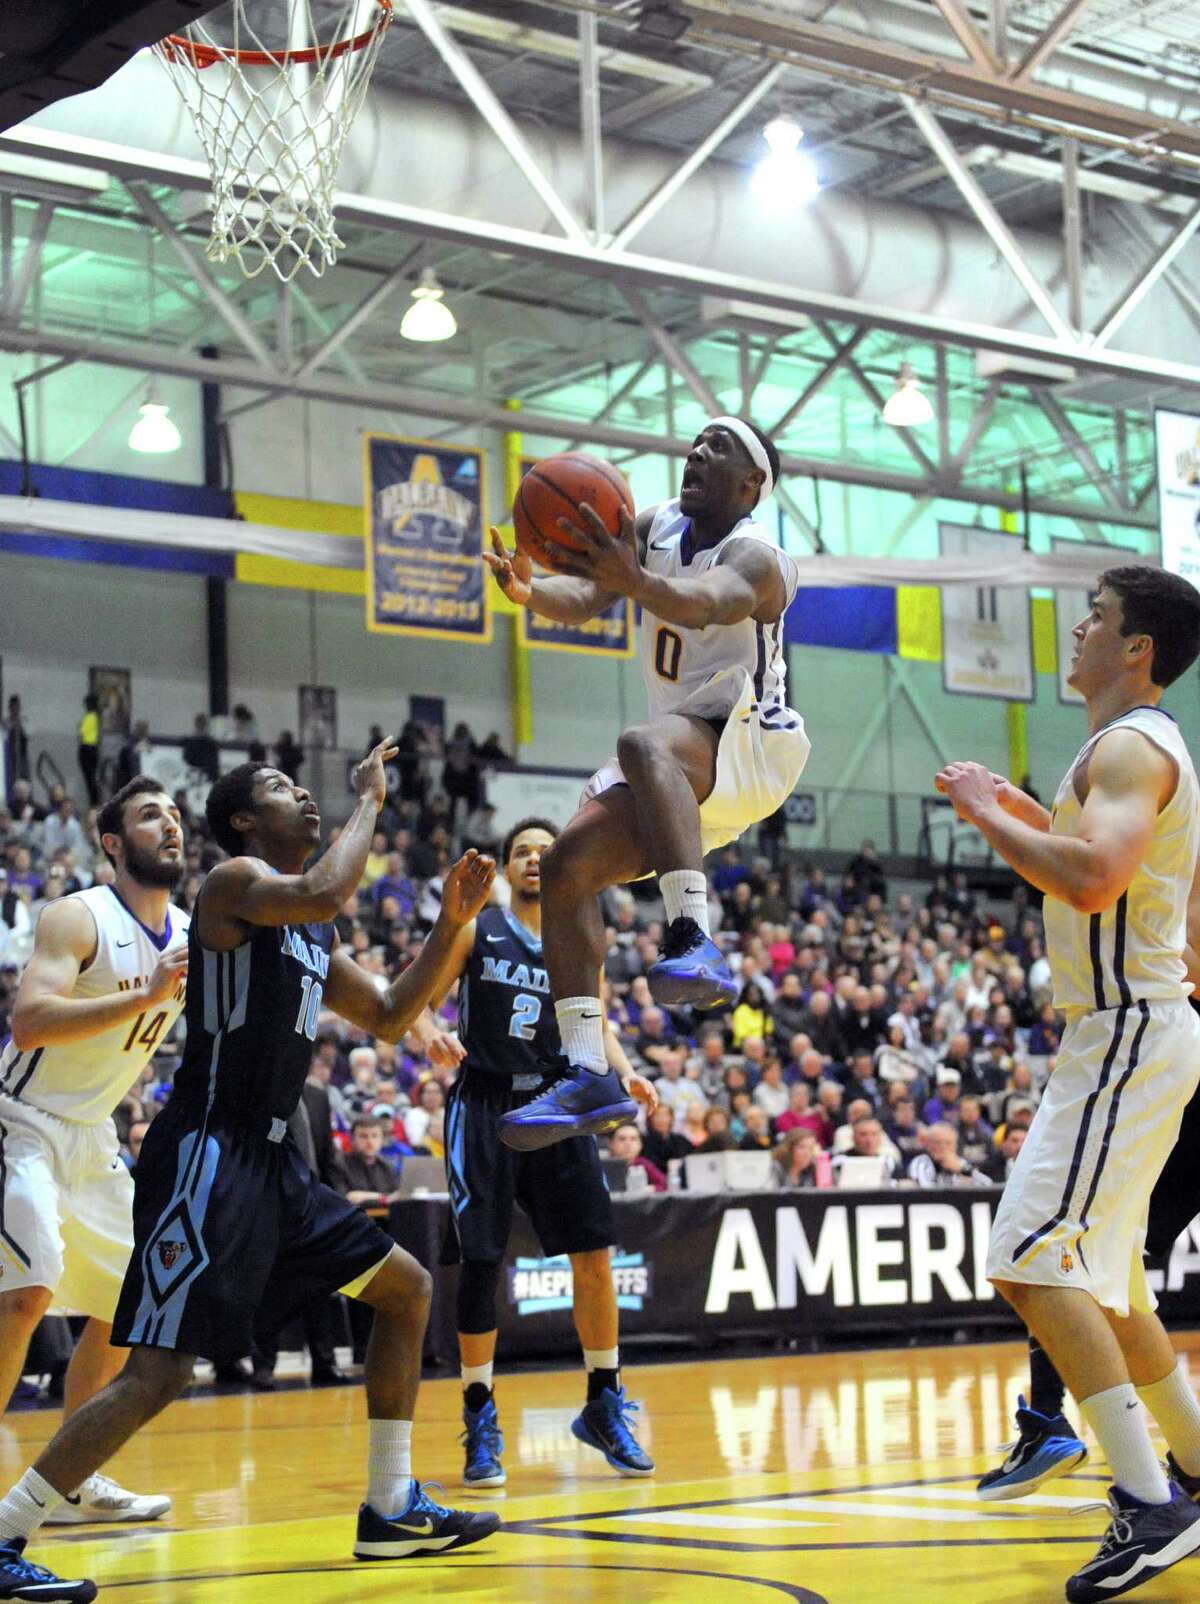 UAlbany's Evan Singletary goes in for a score during their America East quarterfinals game against Maine at the SEFCU Arena on Wednesday March 4, 2015 in Albany, N.Y. (Michael P. Farrell/Times Union)